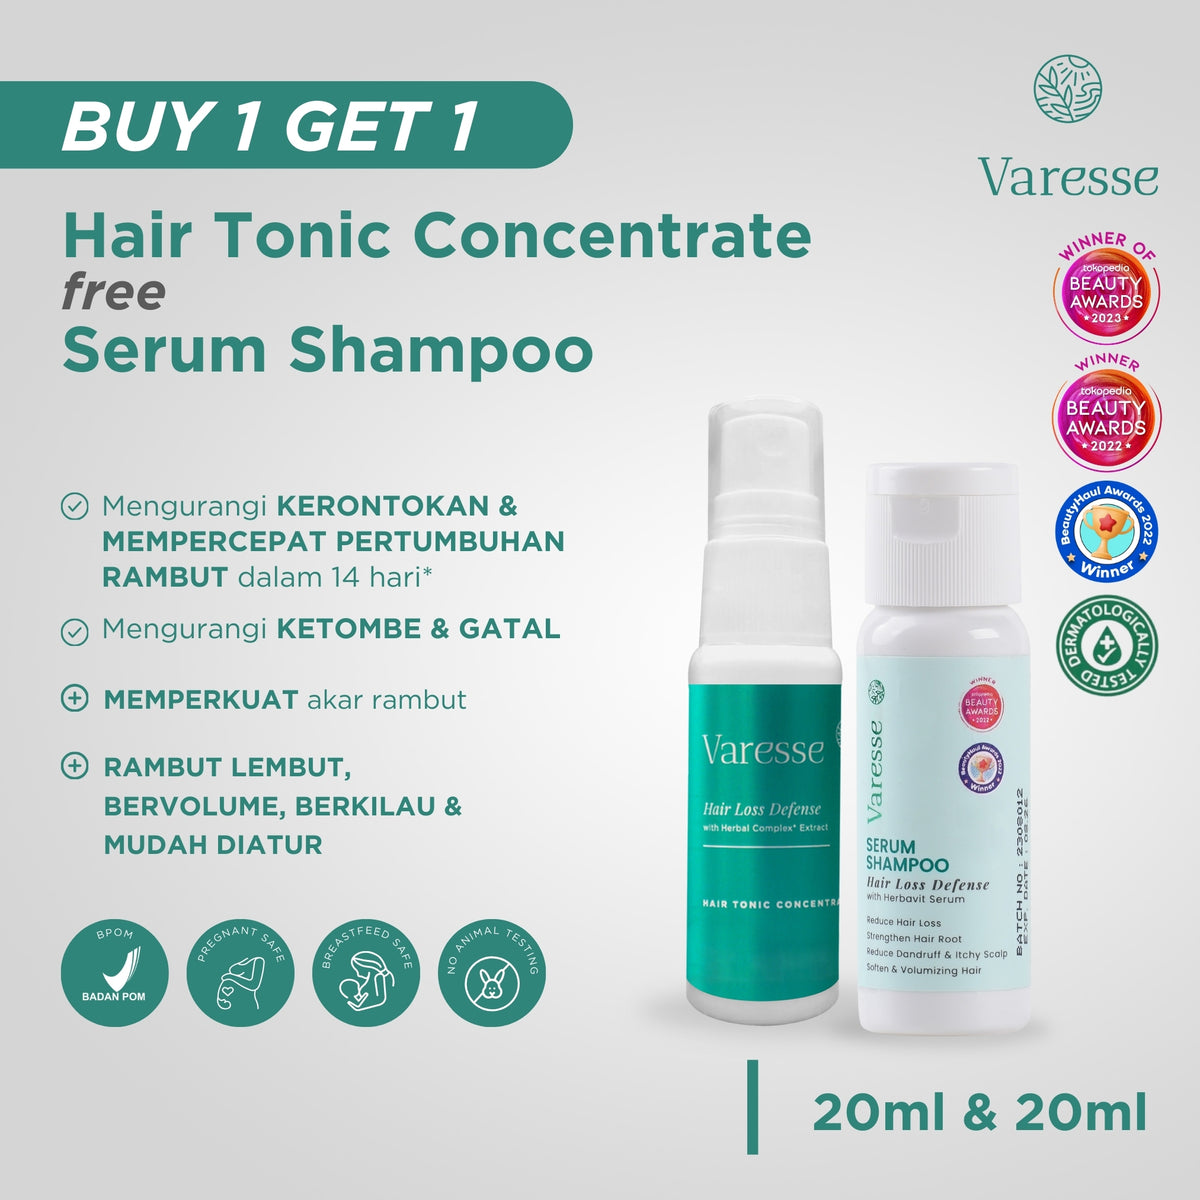 Varesse Hair Tonic Concentrate 20ml + Serum Shampoo 2in1 Conditioner 20ml